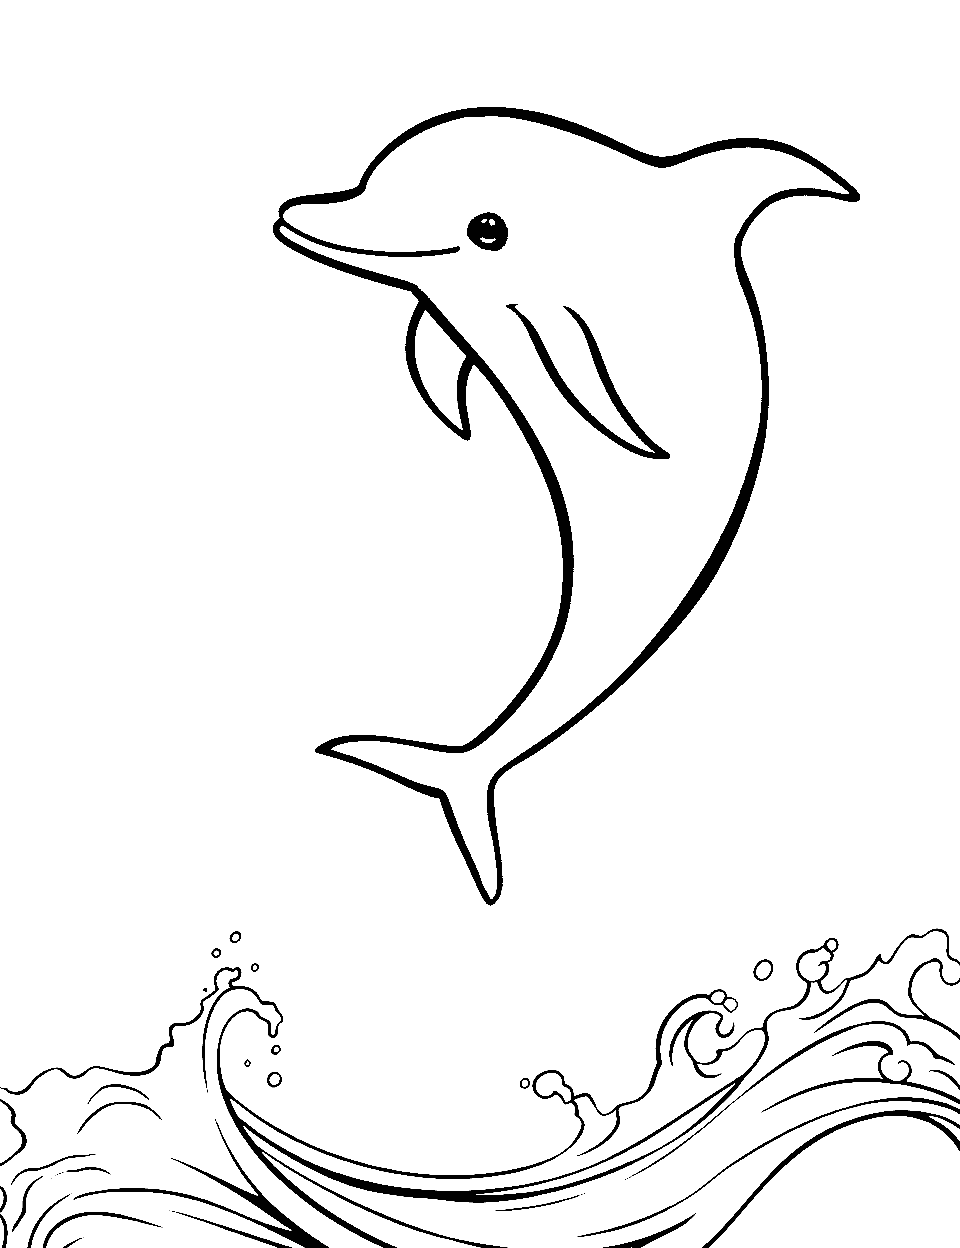 Adventurous Jumping Dolphin Coloring Page - A lively dolphin leaping in the midst of dynamic yet simplistic ocean waves.